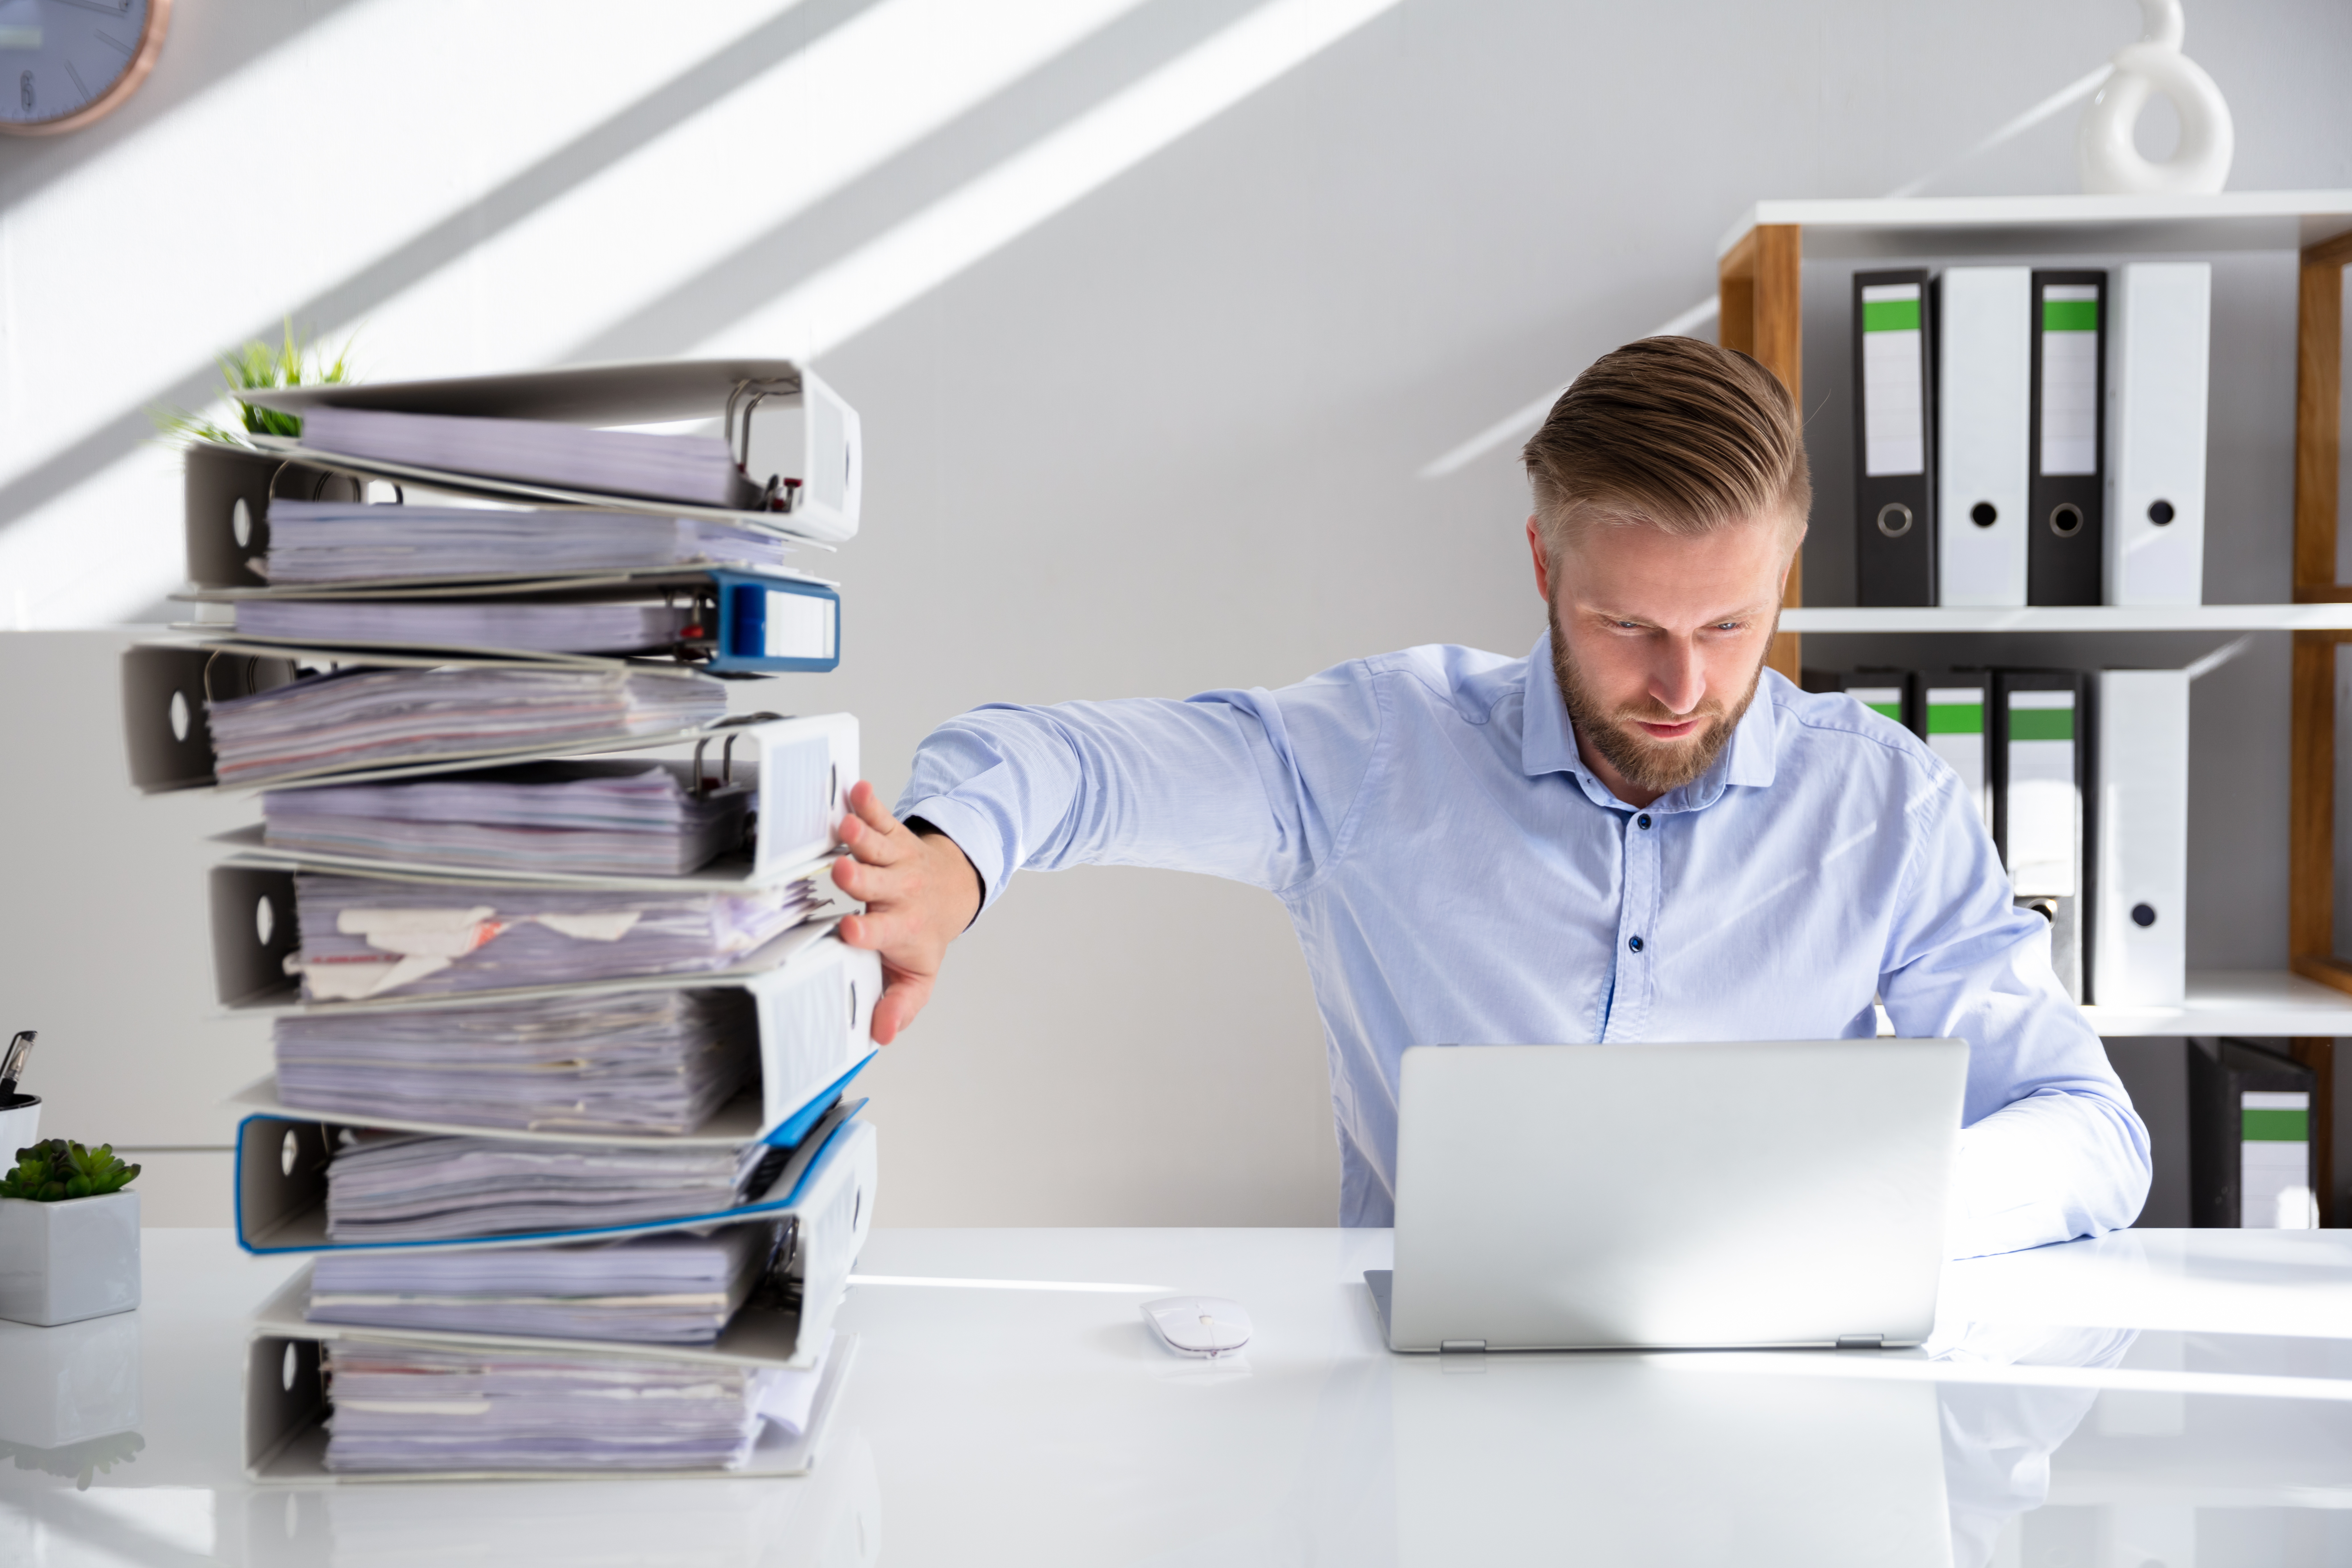 A male accountant working on a laptop pushes a stack of binders full of papers to the side.